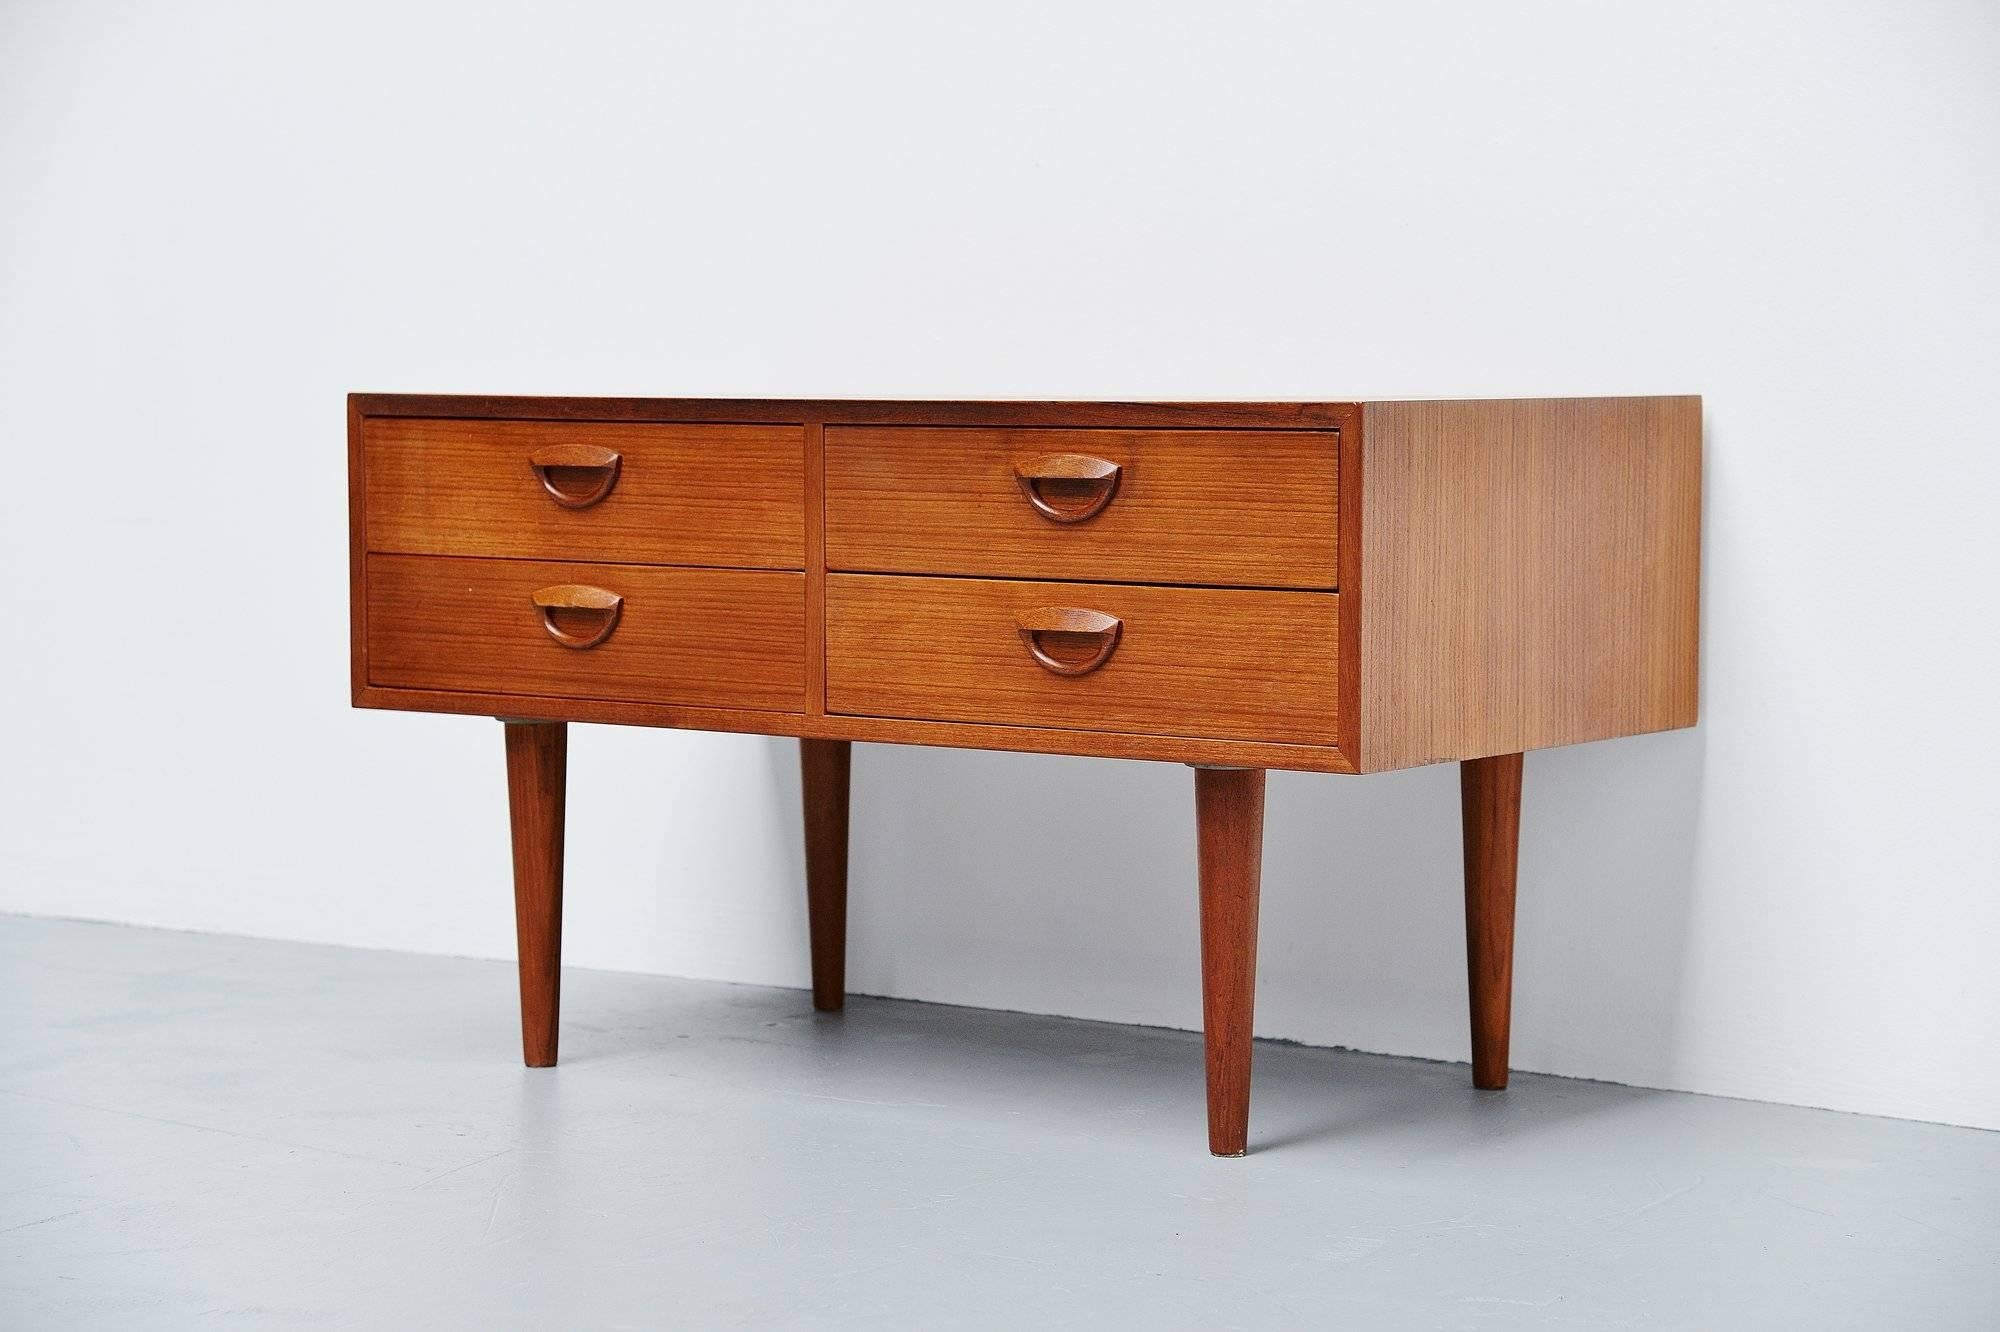 Nice and subtle chest of drawers designed by Kai Kristiansen and produced by FM Mobler, Denmark, 1960. This small chest of drawers has four deep drawers and could be used nicely as a TV table or something. The cabinet is in original condition and